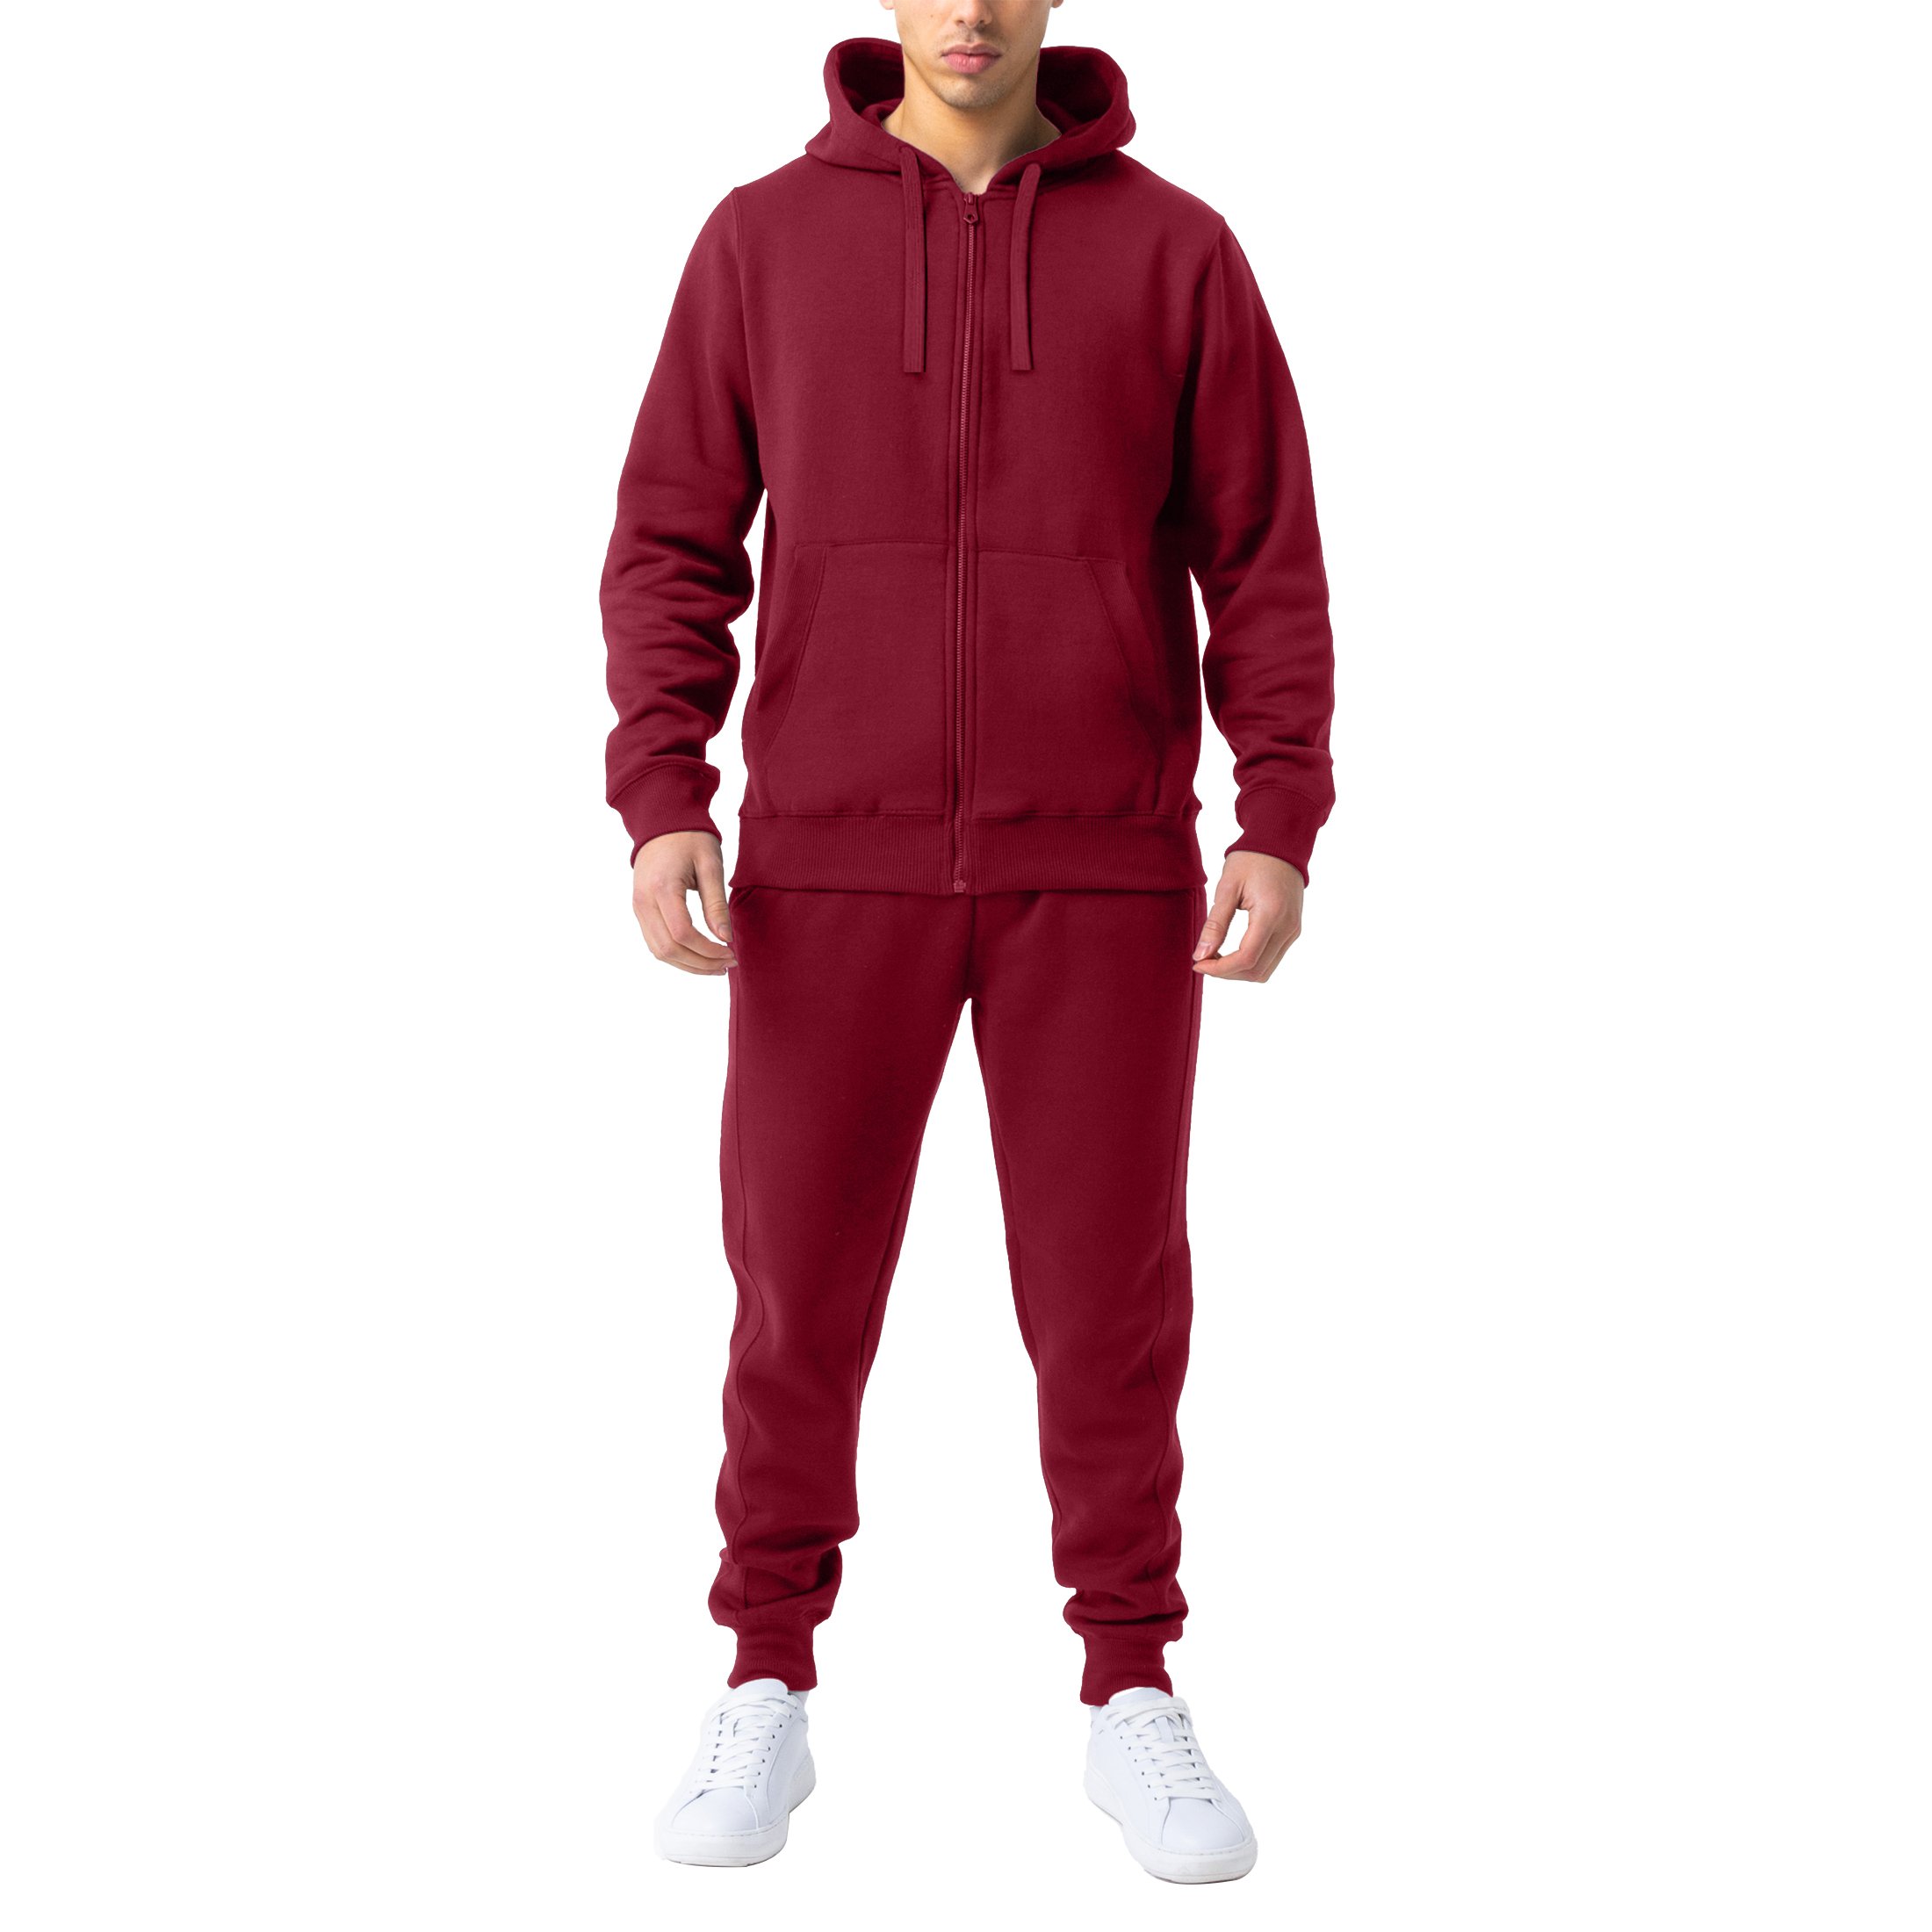 Men's Casual Jogging Athletic Active Full Zip Up Tracksuit - Red, X-Large